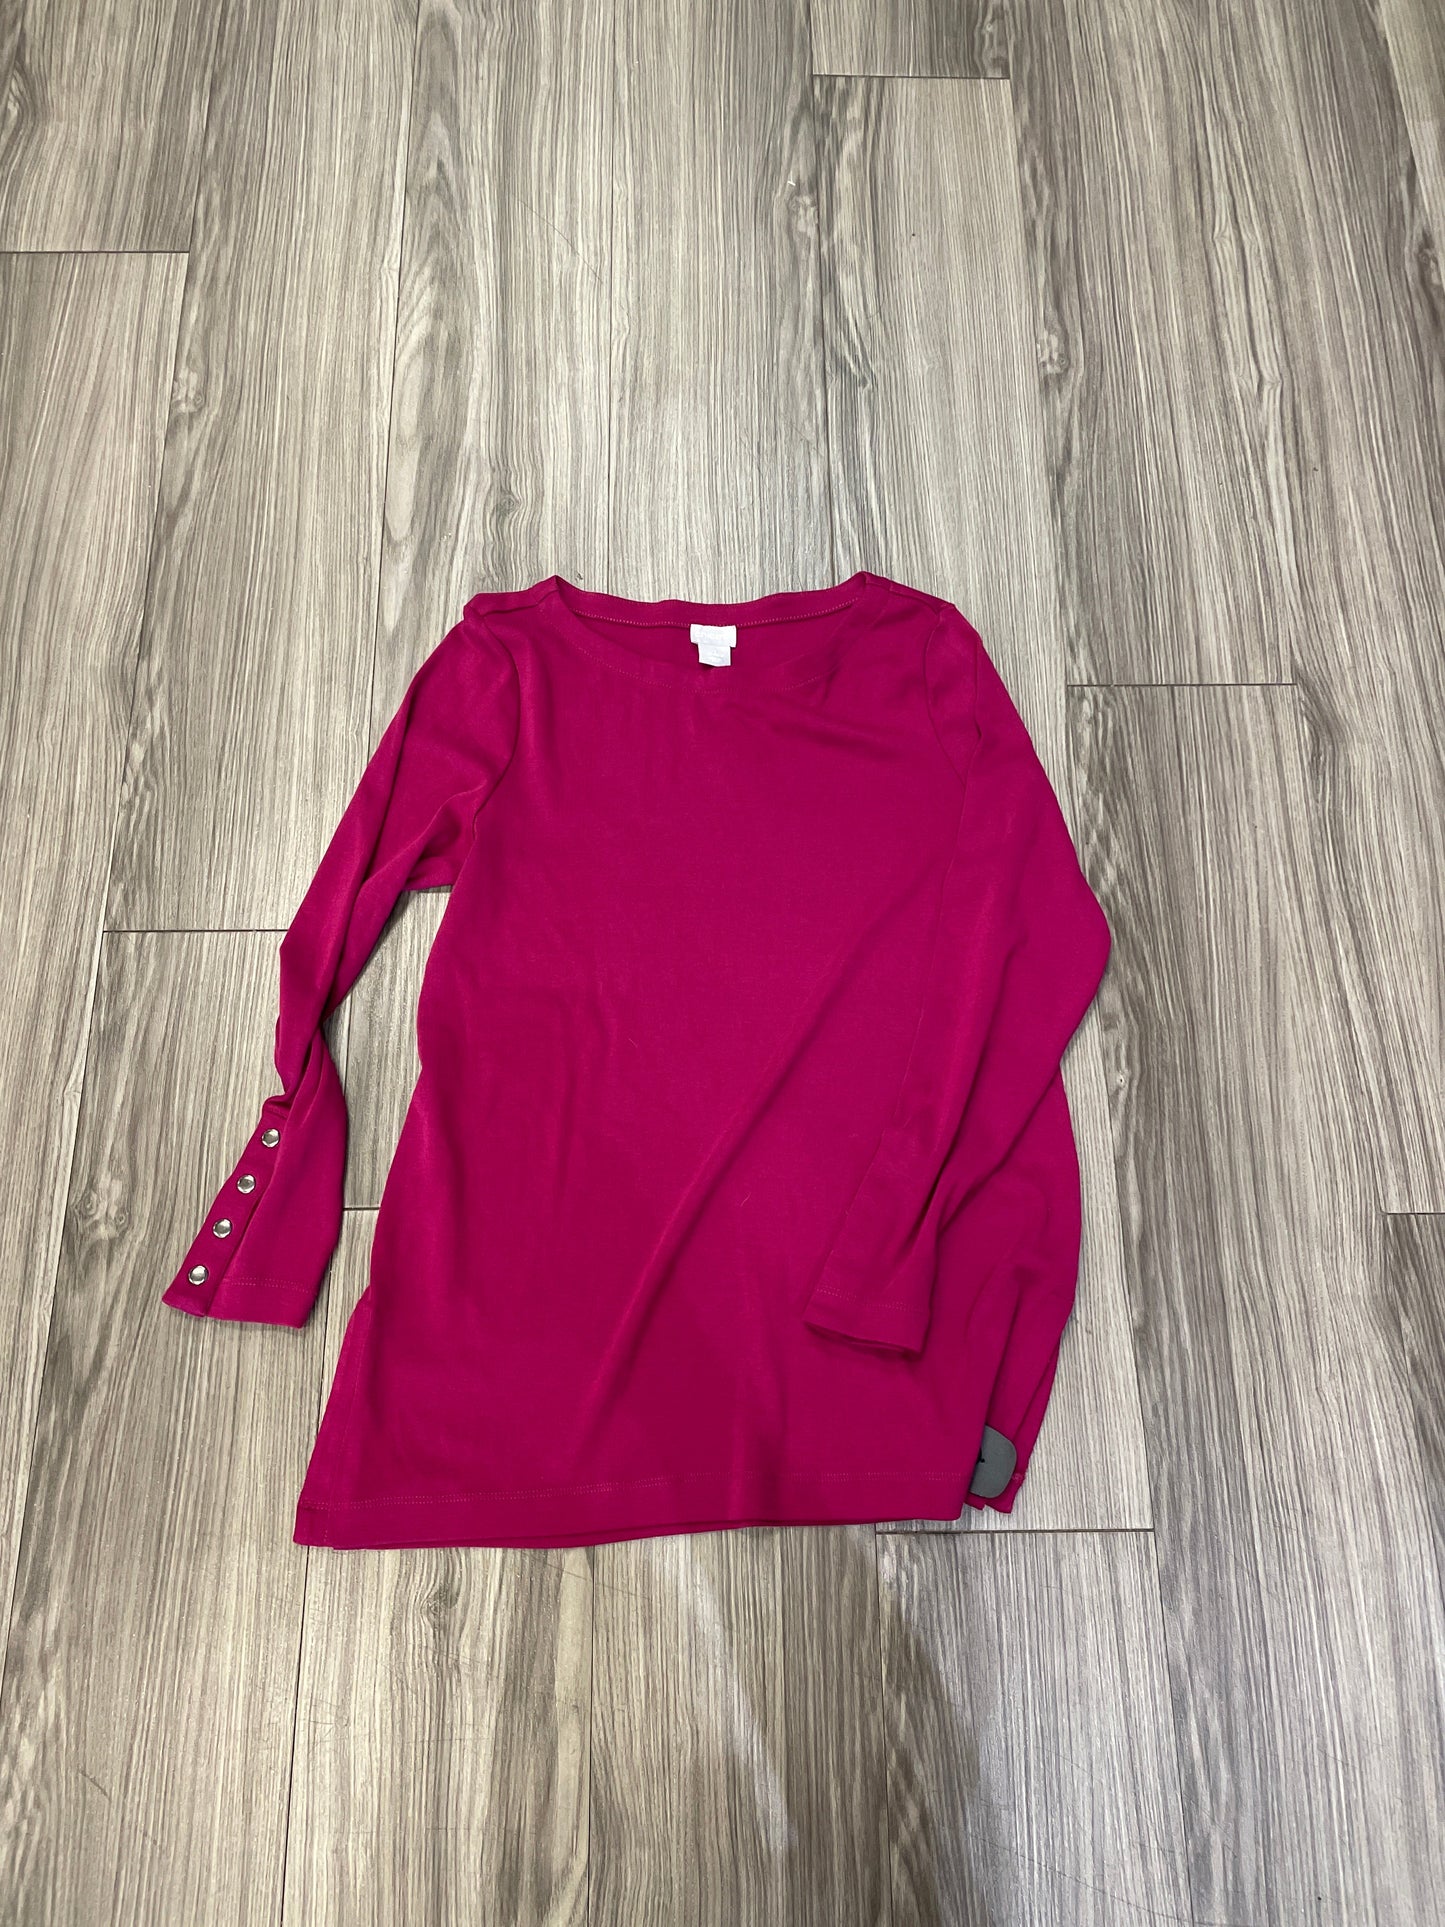 Pink Top Long Sleeve Chicos, Size M